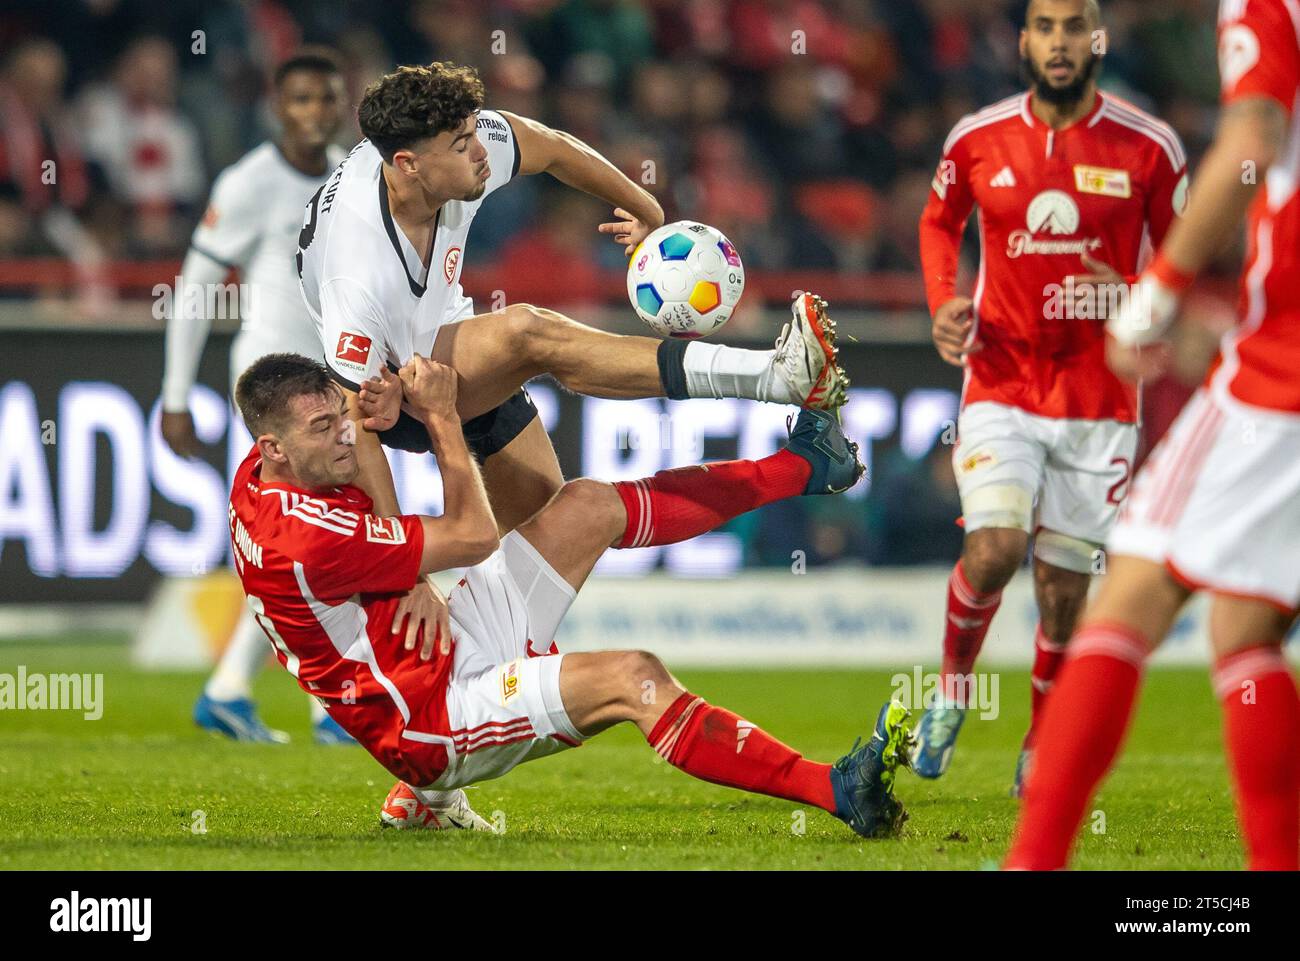 Berlin, Germany. 04th Nov, 2023. Soccer: Bundesliga, 1. FC Union Berlin - Eintracht Frankfurt, Matchday 10, An der Alten Försterei. Eintracht Frankfurt's Nacho Ferri fights for the ball against Berlin's Robin Knoche. Credit: Andreas Gora/dpa - IMPORTANT NOTE: In accordance with the regulations of the DFL German Football League and the DFB German Football Association, it is prohibited to utilize or have utilized photographs taken in the stadium and/or of the match in the form of sequential images and/or video-like photo series./dpa/Alamy Live News Stock Photo